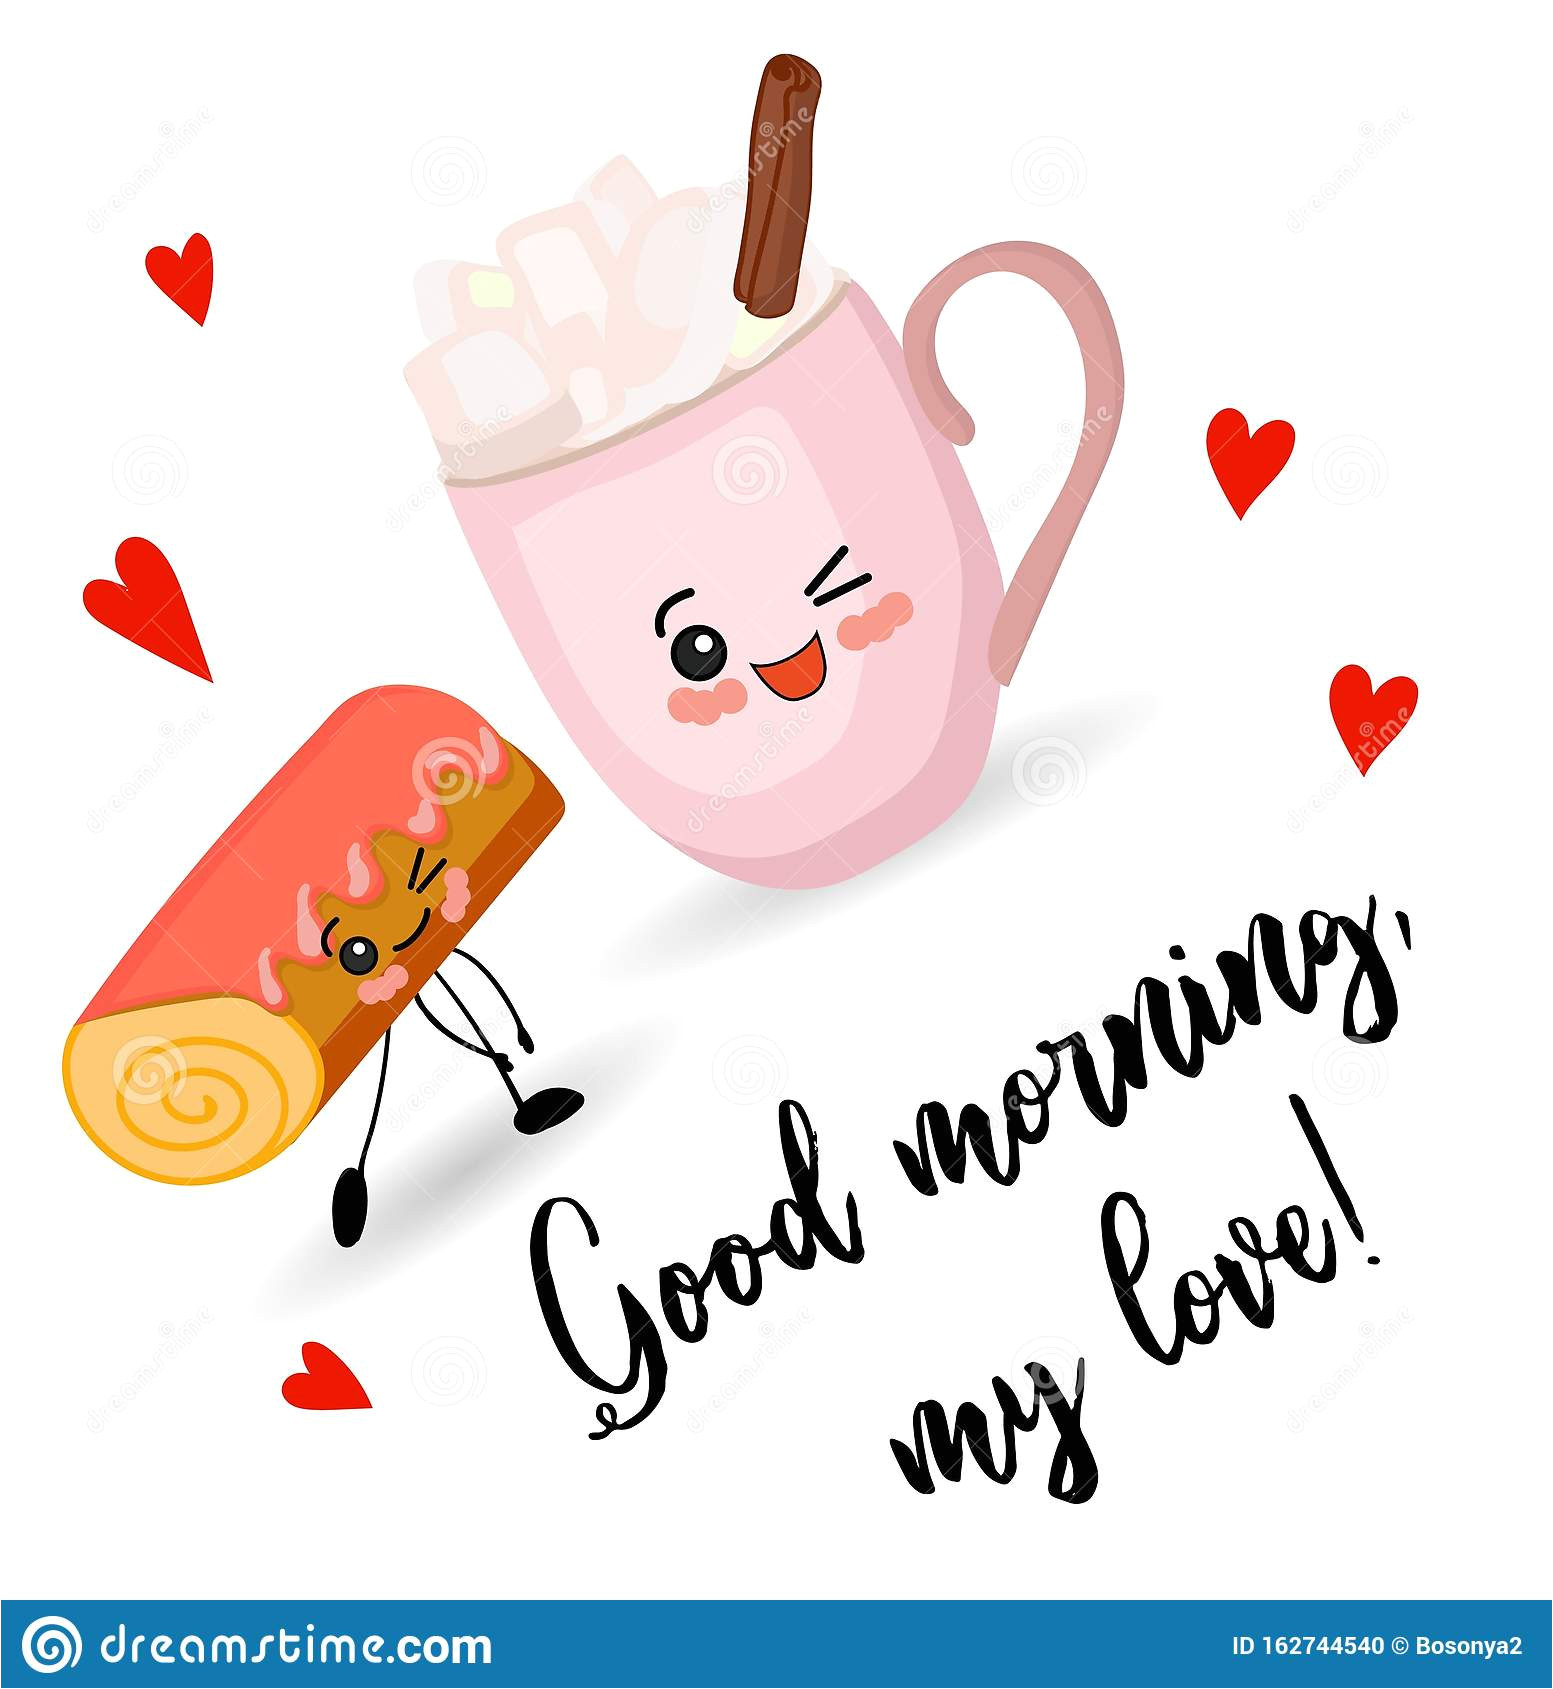 Good Morning My Love Card Good Morning My Love Cute Card for Valentine S Day Tasty